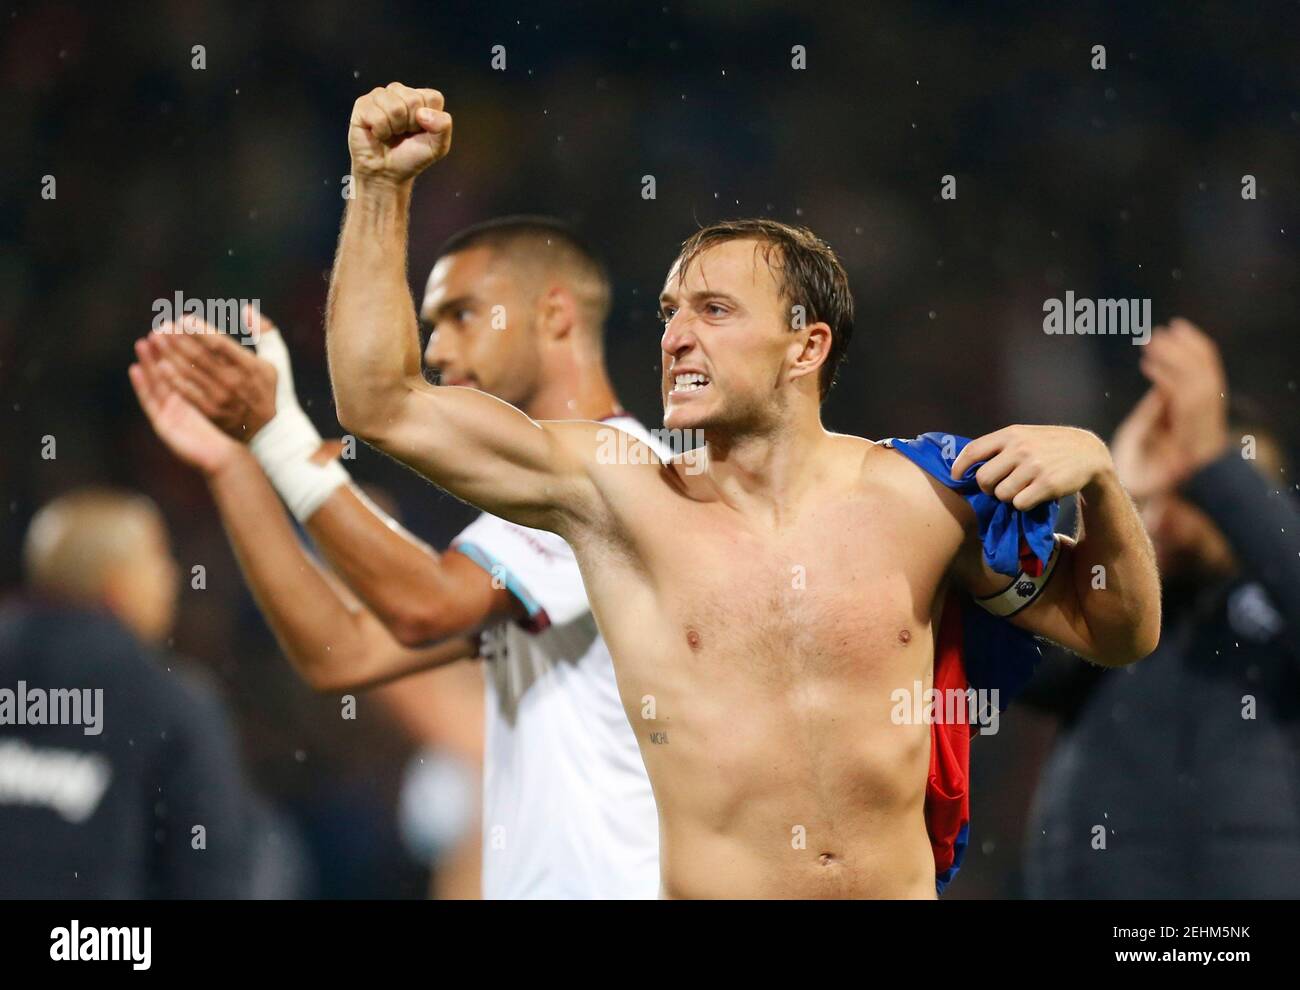 Britain Football Soccer - Crystal Palace v West Ham United - Premier League - Selhurst Park - 15/10/16 West Ham United's Mark Noble celebrates after the match Reuters / Paul Hackett Livepic EDITORIAL USE ONLY. No use with unauthorized audio, video, data, fixture lists, club/league logos or 'live' services. Online in-match use limited to 45 images, no video emulation. No use in betting, games or single club/league/player publications. Please contact your account representative for further details. Stock Photo